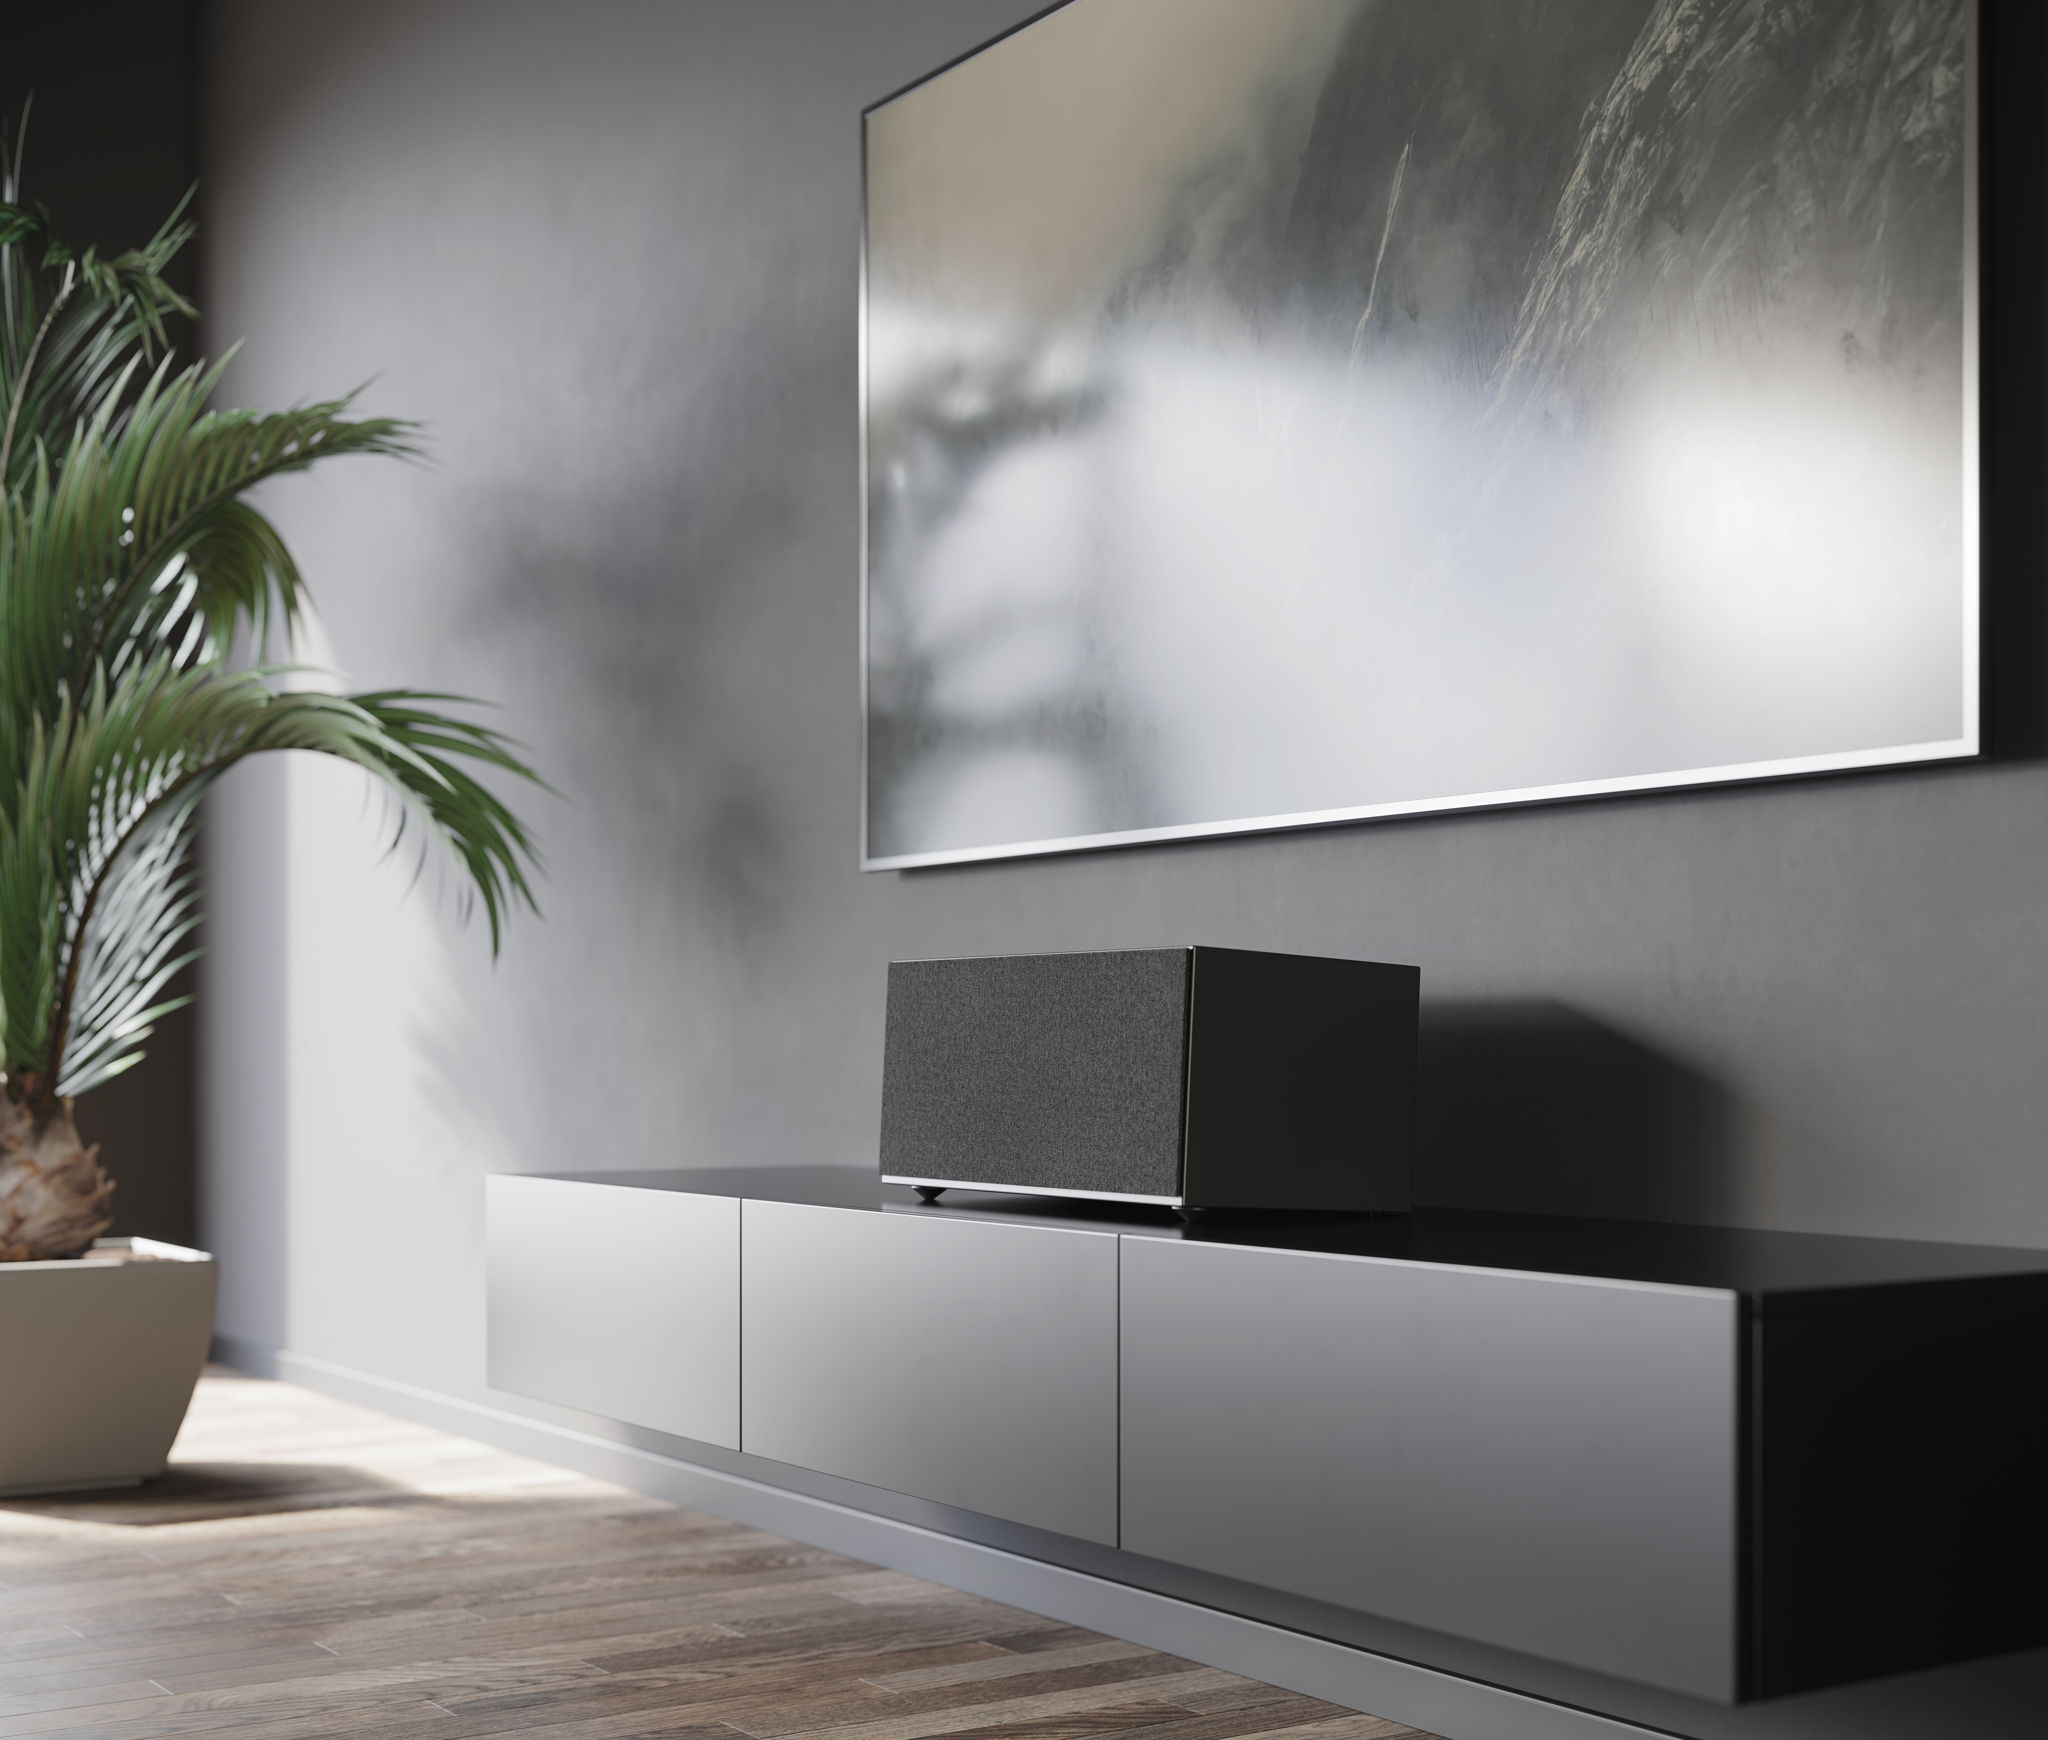 Elevate your TV watching experience with immersive & powerful sound, thanks to ARC.